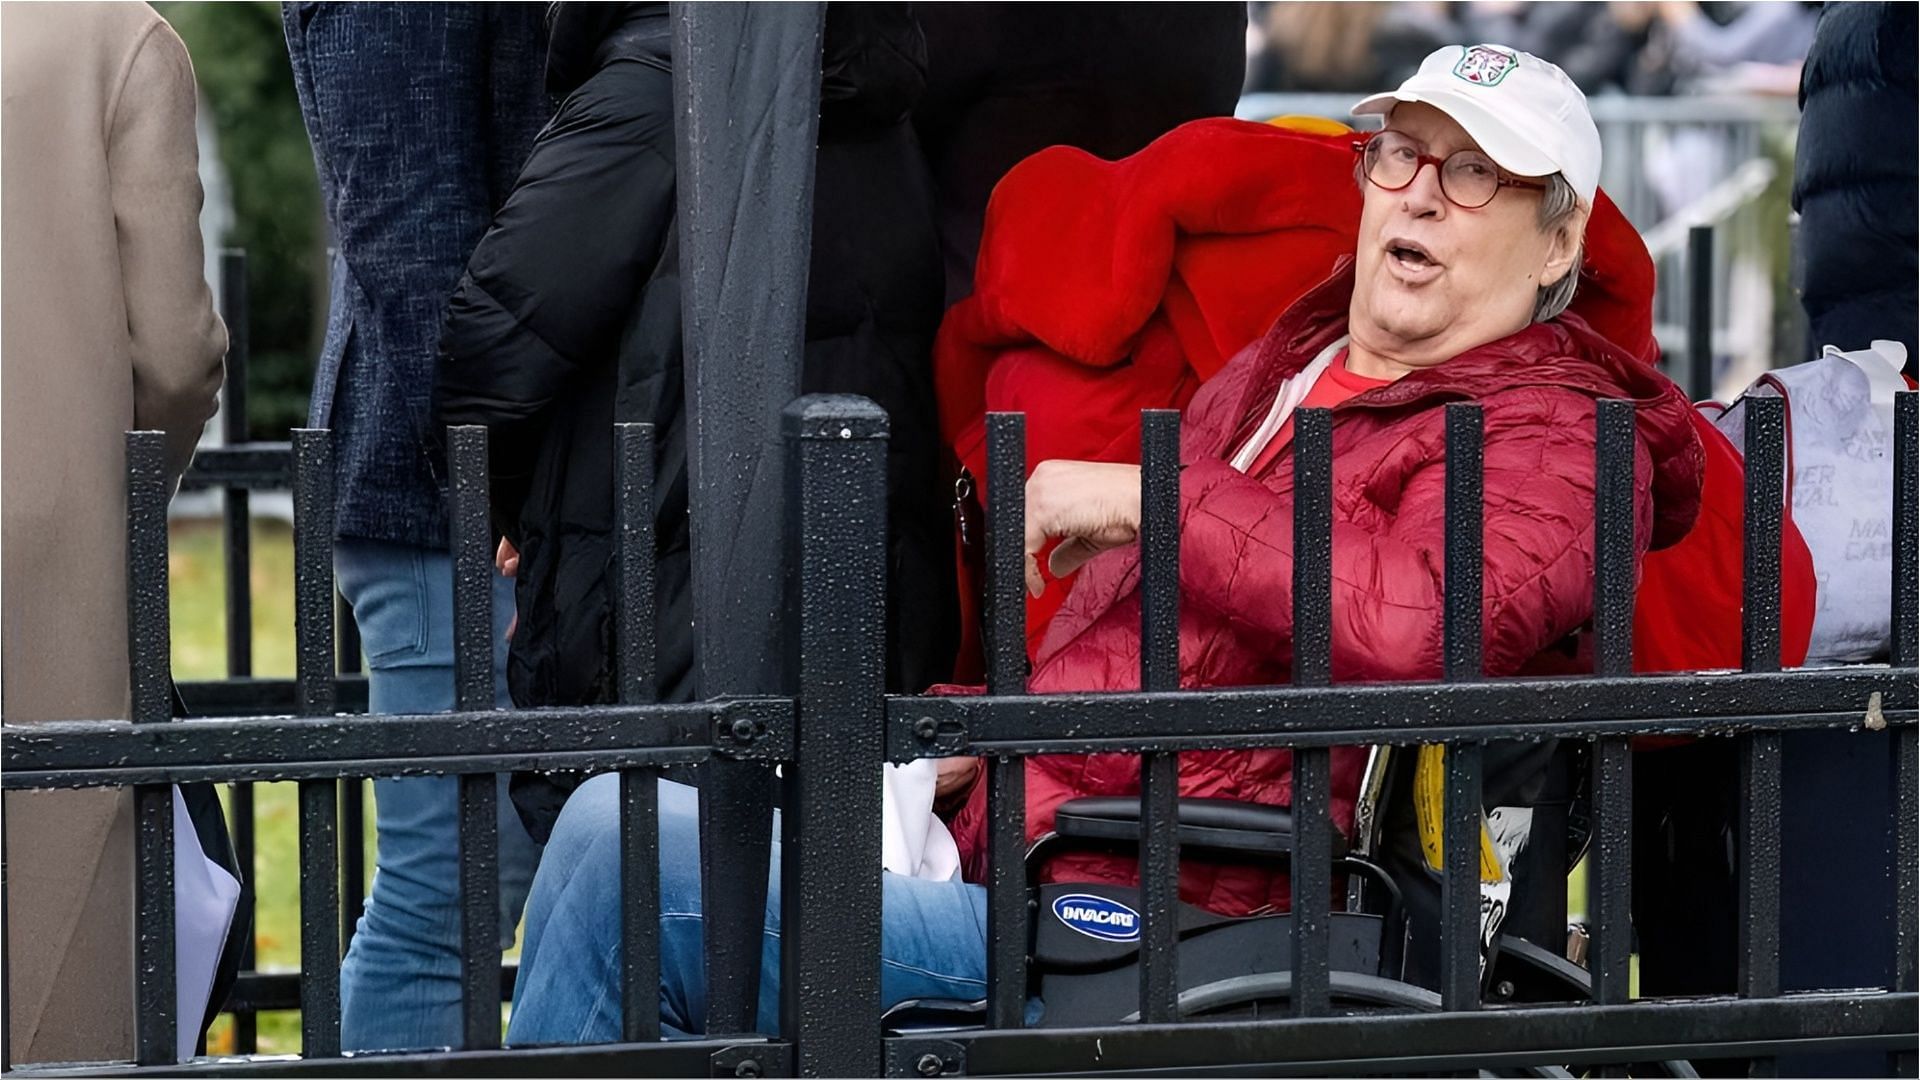 Chevy Chase was spotted using a wheelchair at an event (Image via Josiah_FL/X)